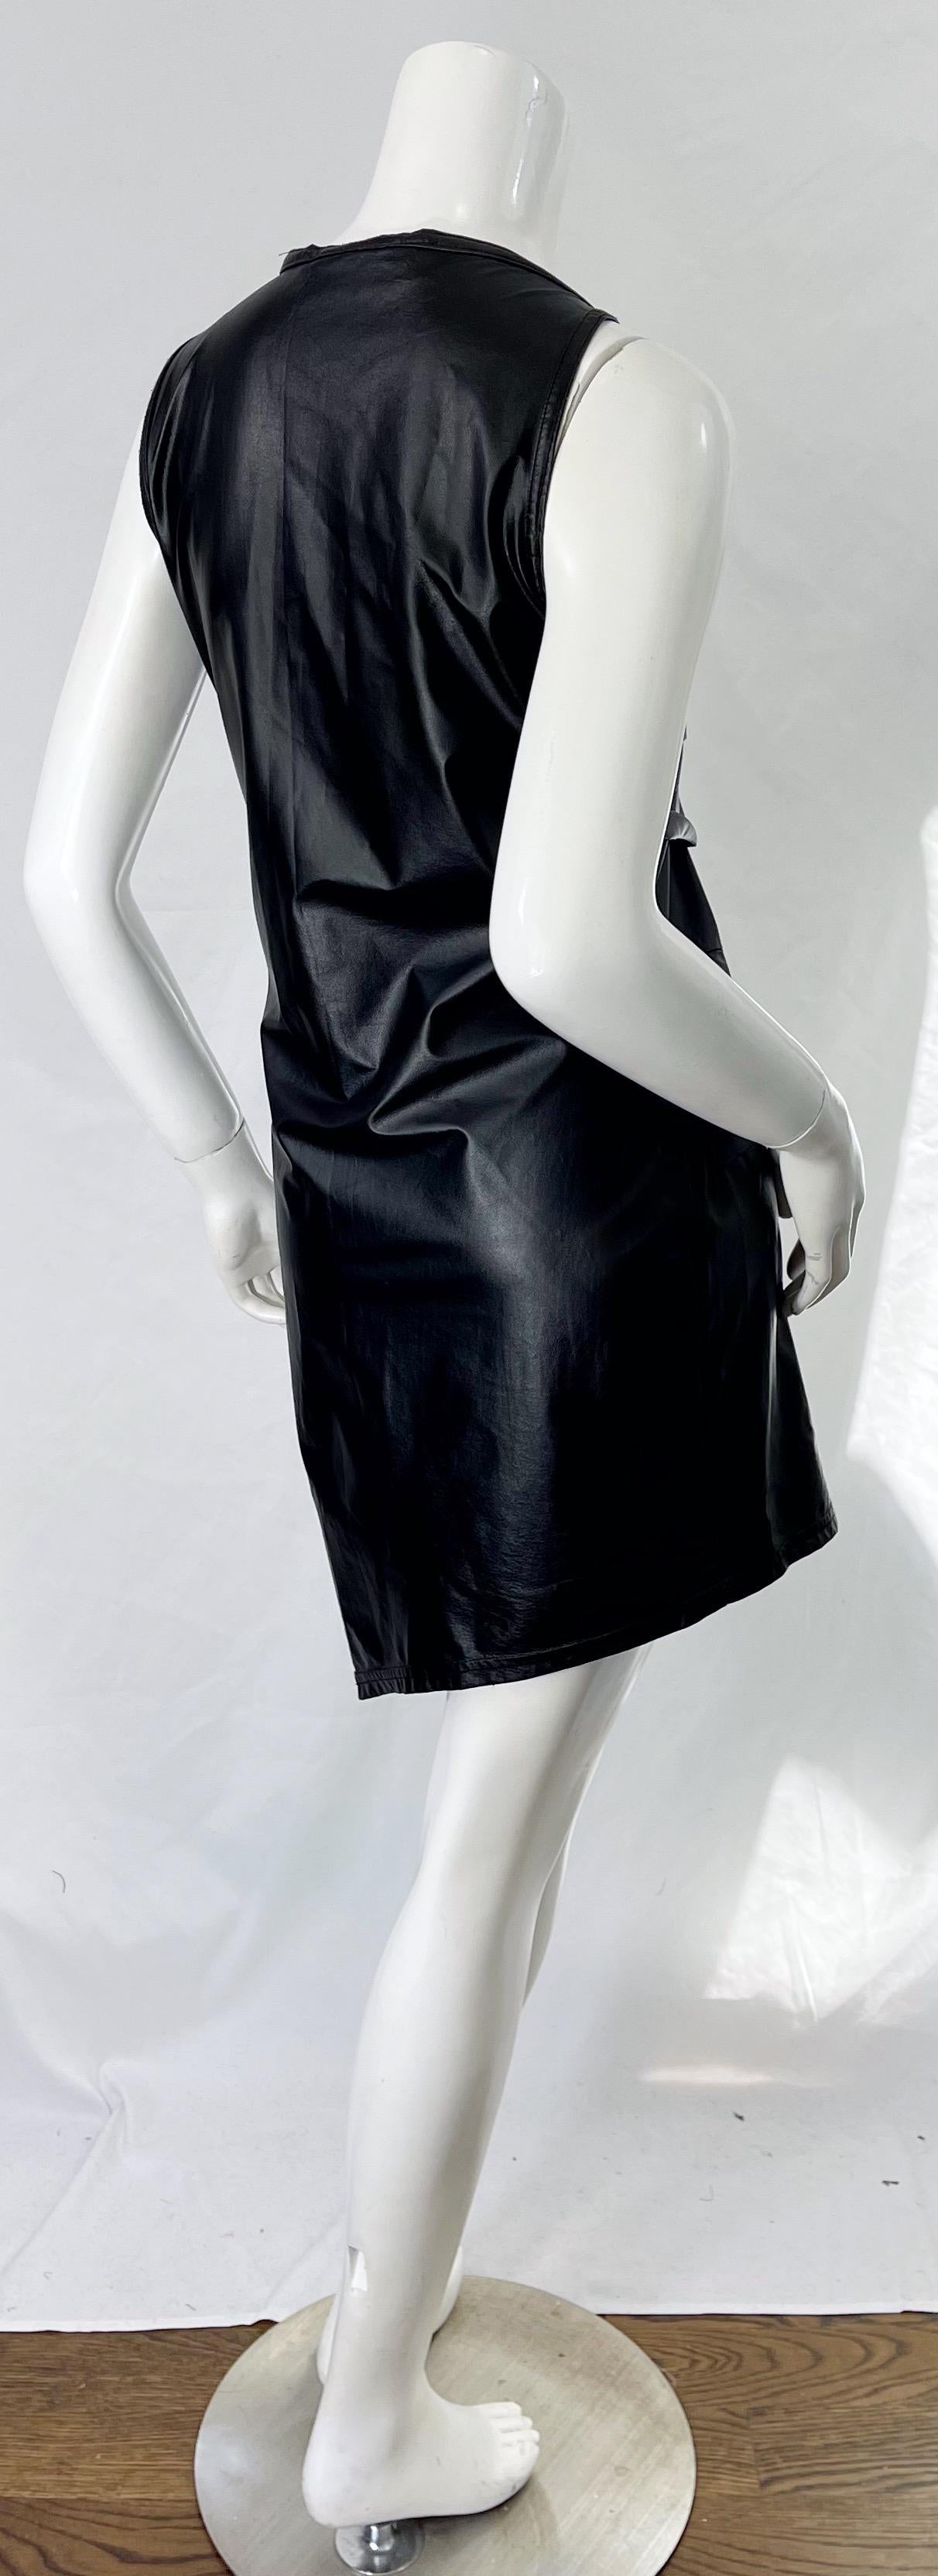 1990s Dexter Wong Club Kid Rave Japanese Black Pleather Vintage 90s Mini Dress In Excellent Condition For Sale In San Diego, CA